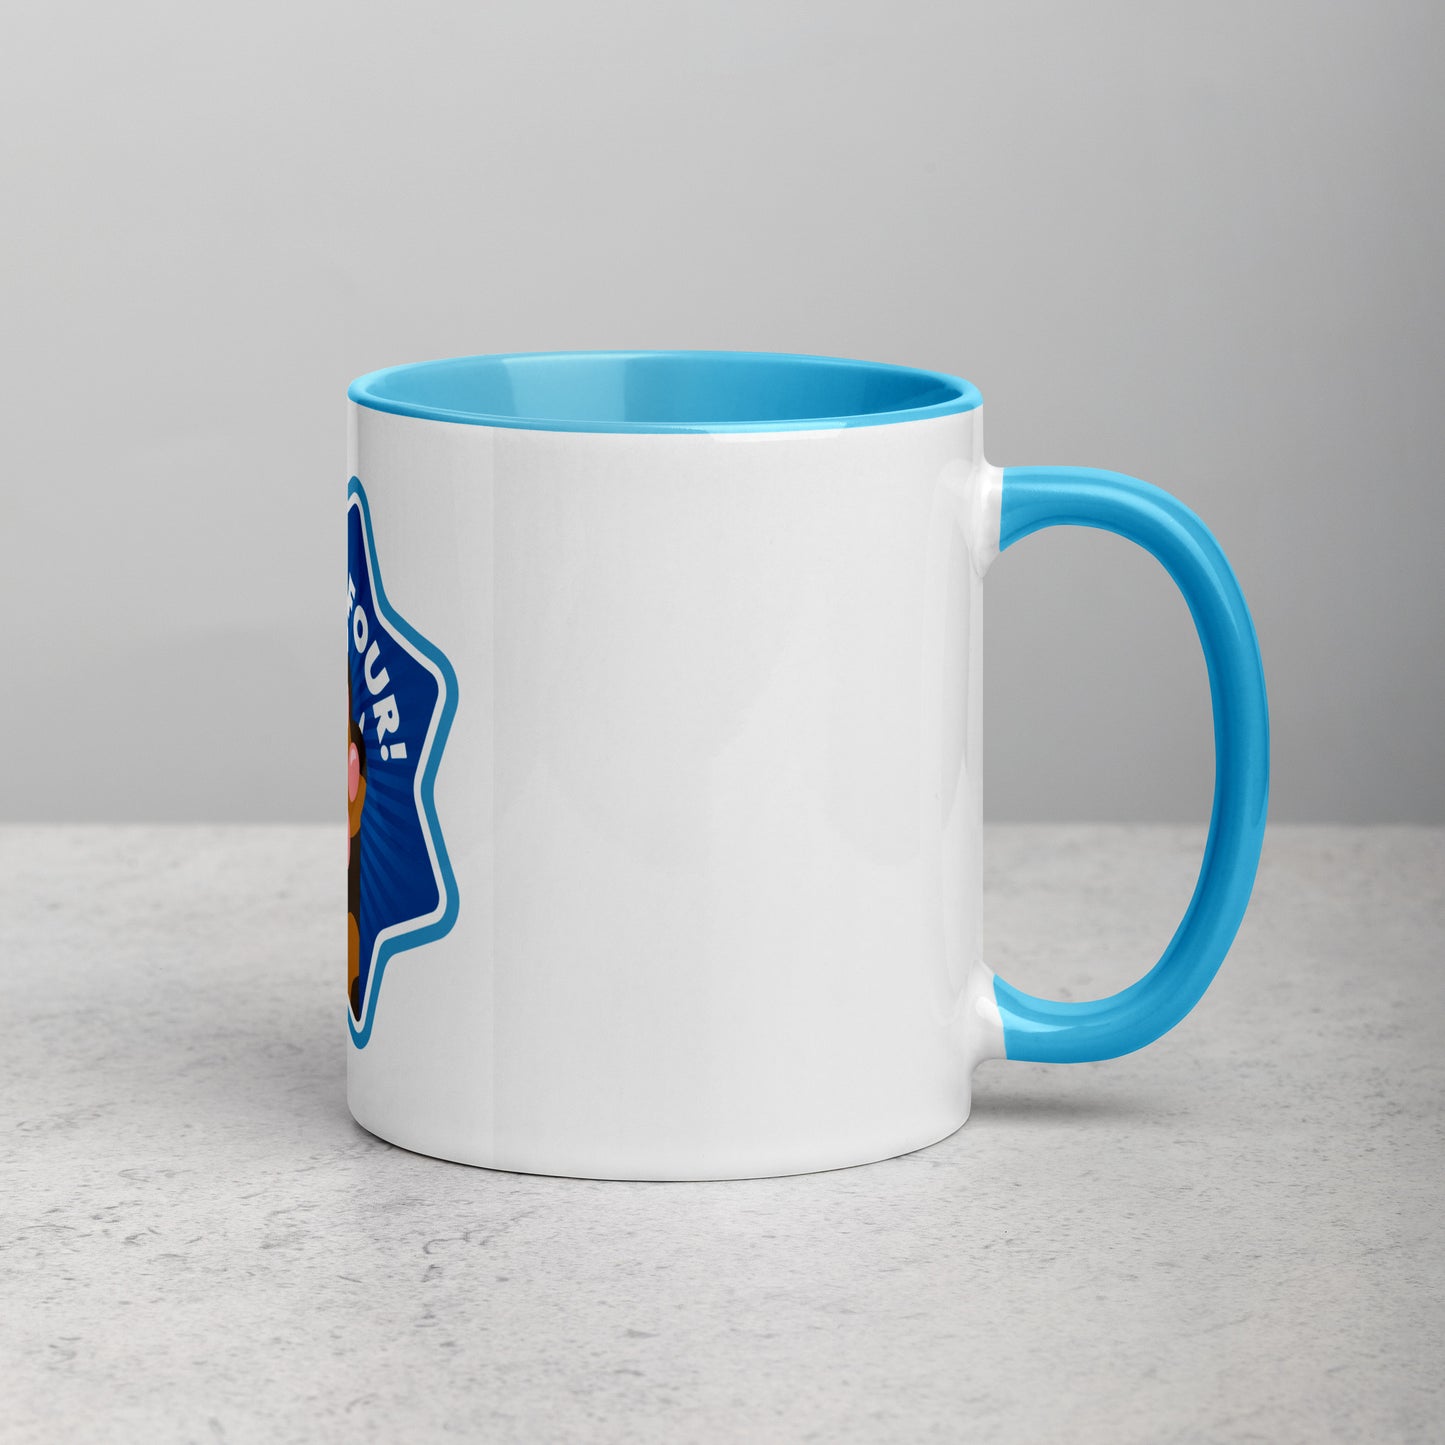 right hand facing image of a white mug with blue interior and handle. Mug has image of a tortoiseshell cats paw on a blue 8 sided star with the text 'give me four' 